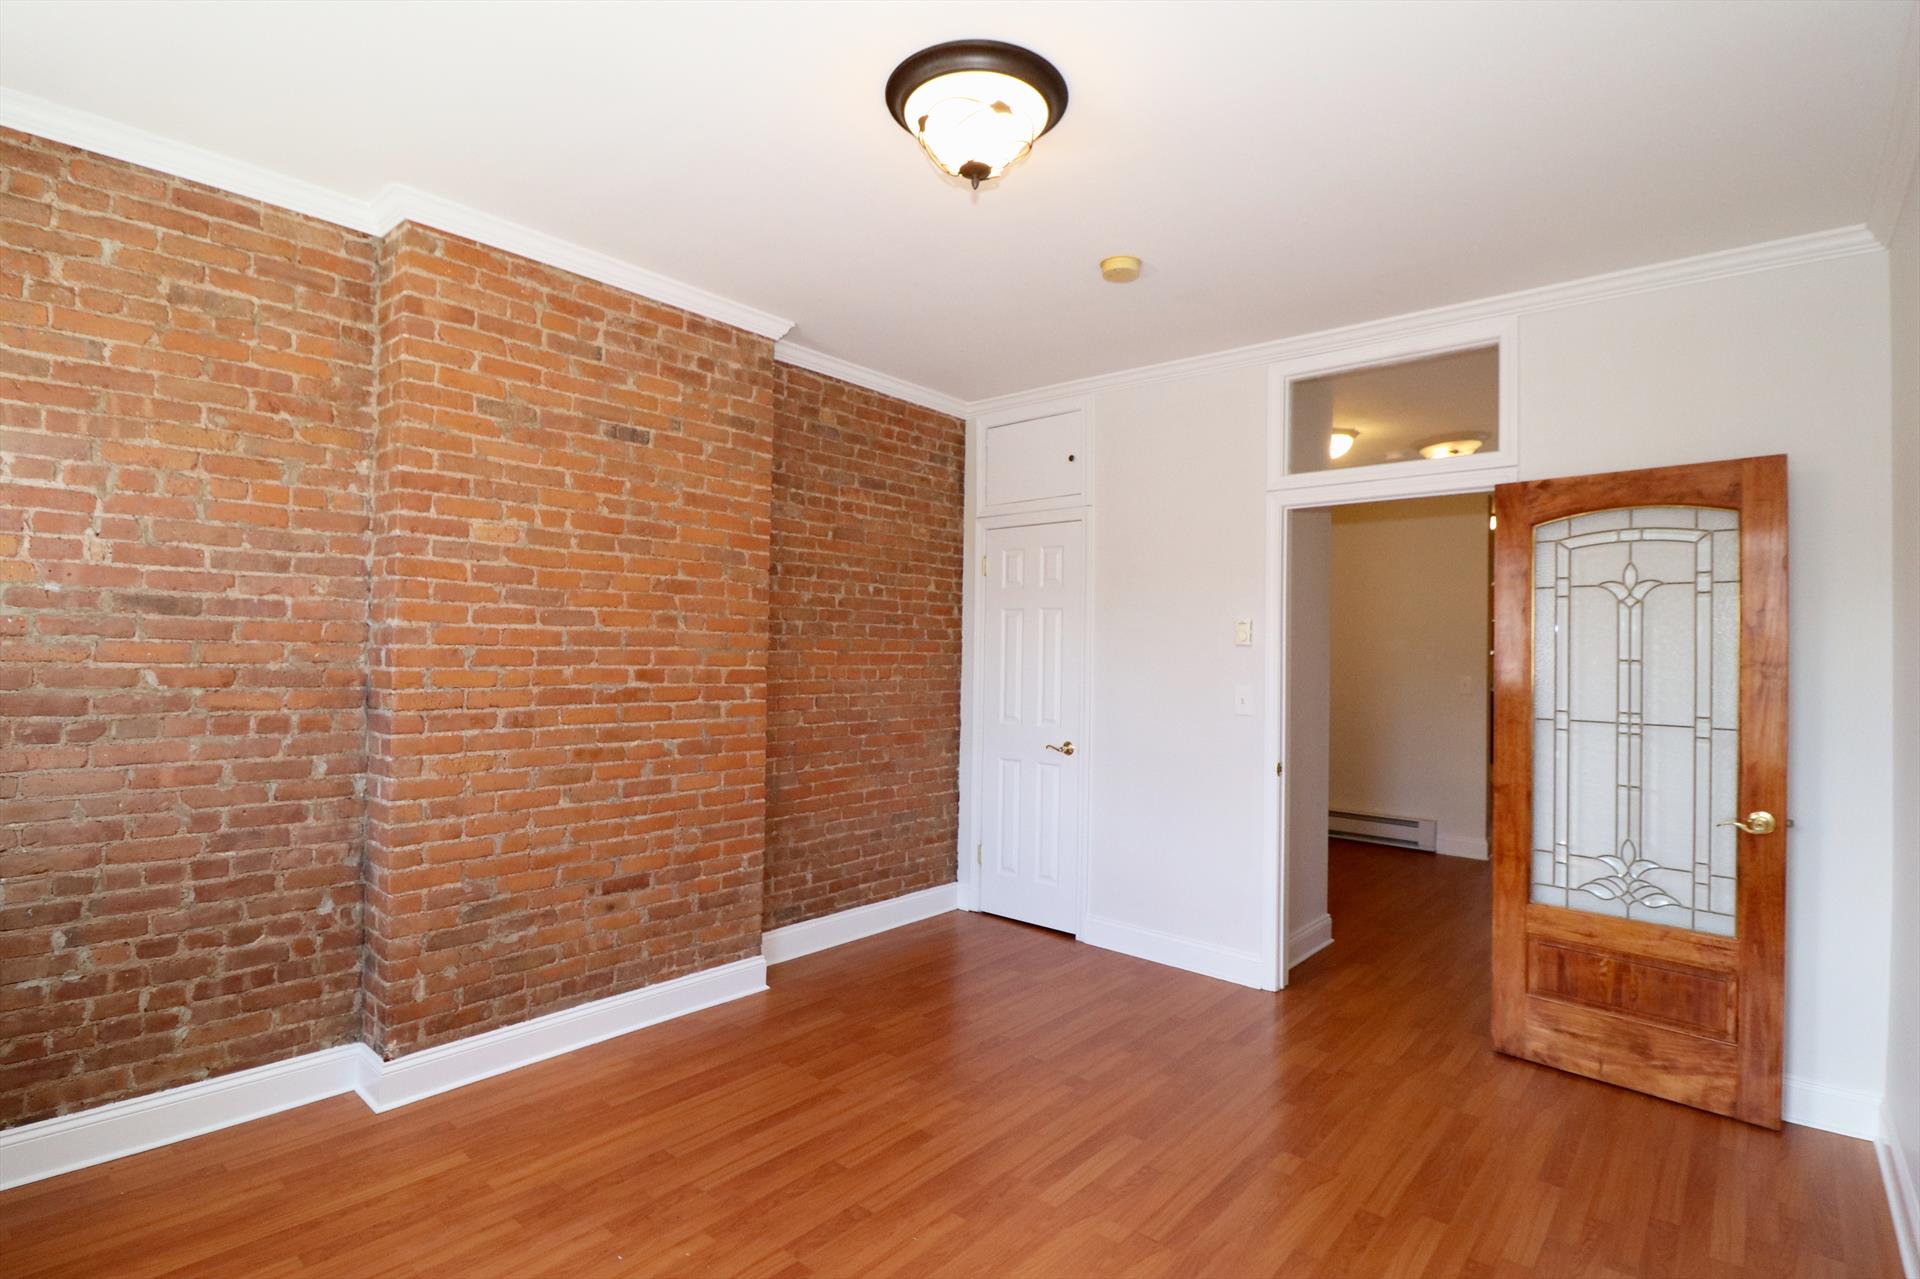 Bright, recently renovated one bedroom apartment features exposed brick details, hardwood floors, stainless appliances (dishwasher, microwave, & fridge). Additional amenities include: shared laundry, & shared outdoor space. Located near Hamilton Park which has tennis and basketball courts, weekly seasonal farmer's market. Available for June 1st. Ask for the virtual tour!